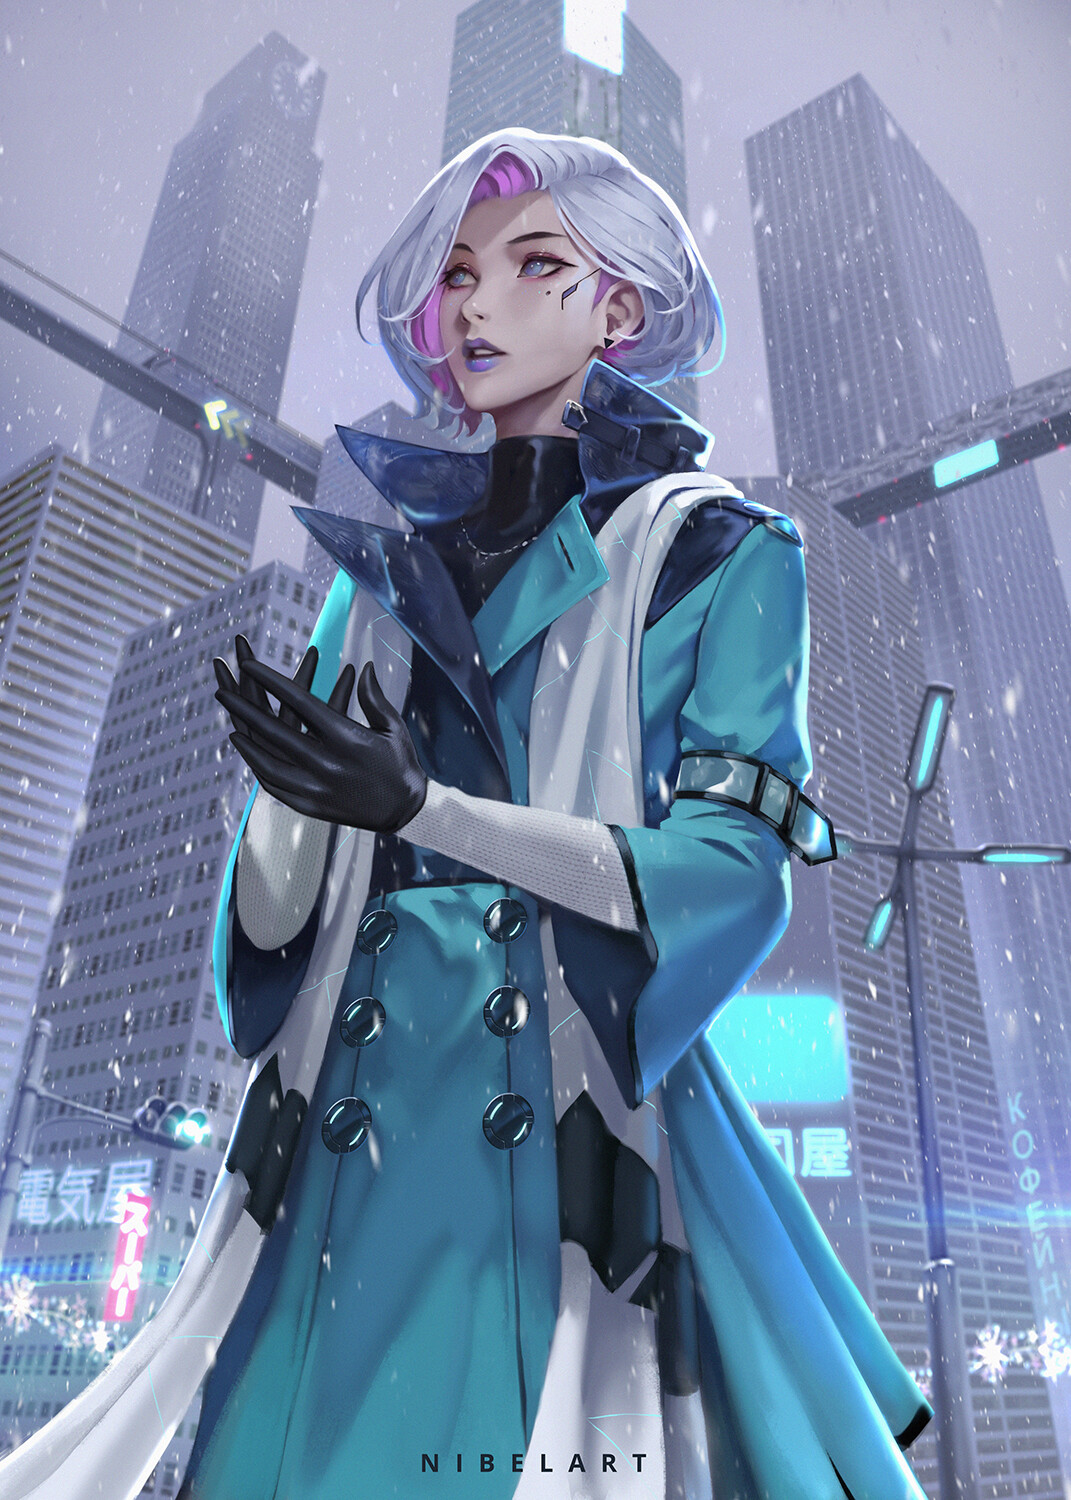 Anime 1071x1500 anime girls simple background original characters drawing concept art NibelArt winter snow short hair multi-colored hair silver hair coats